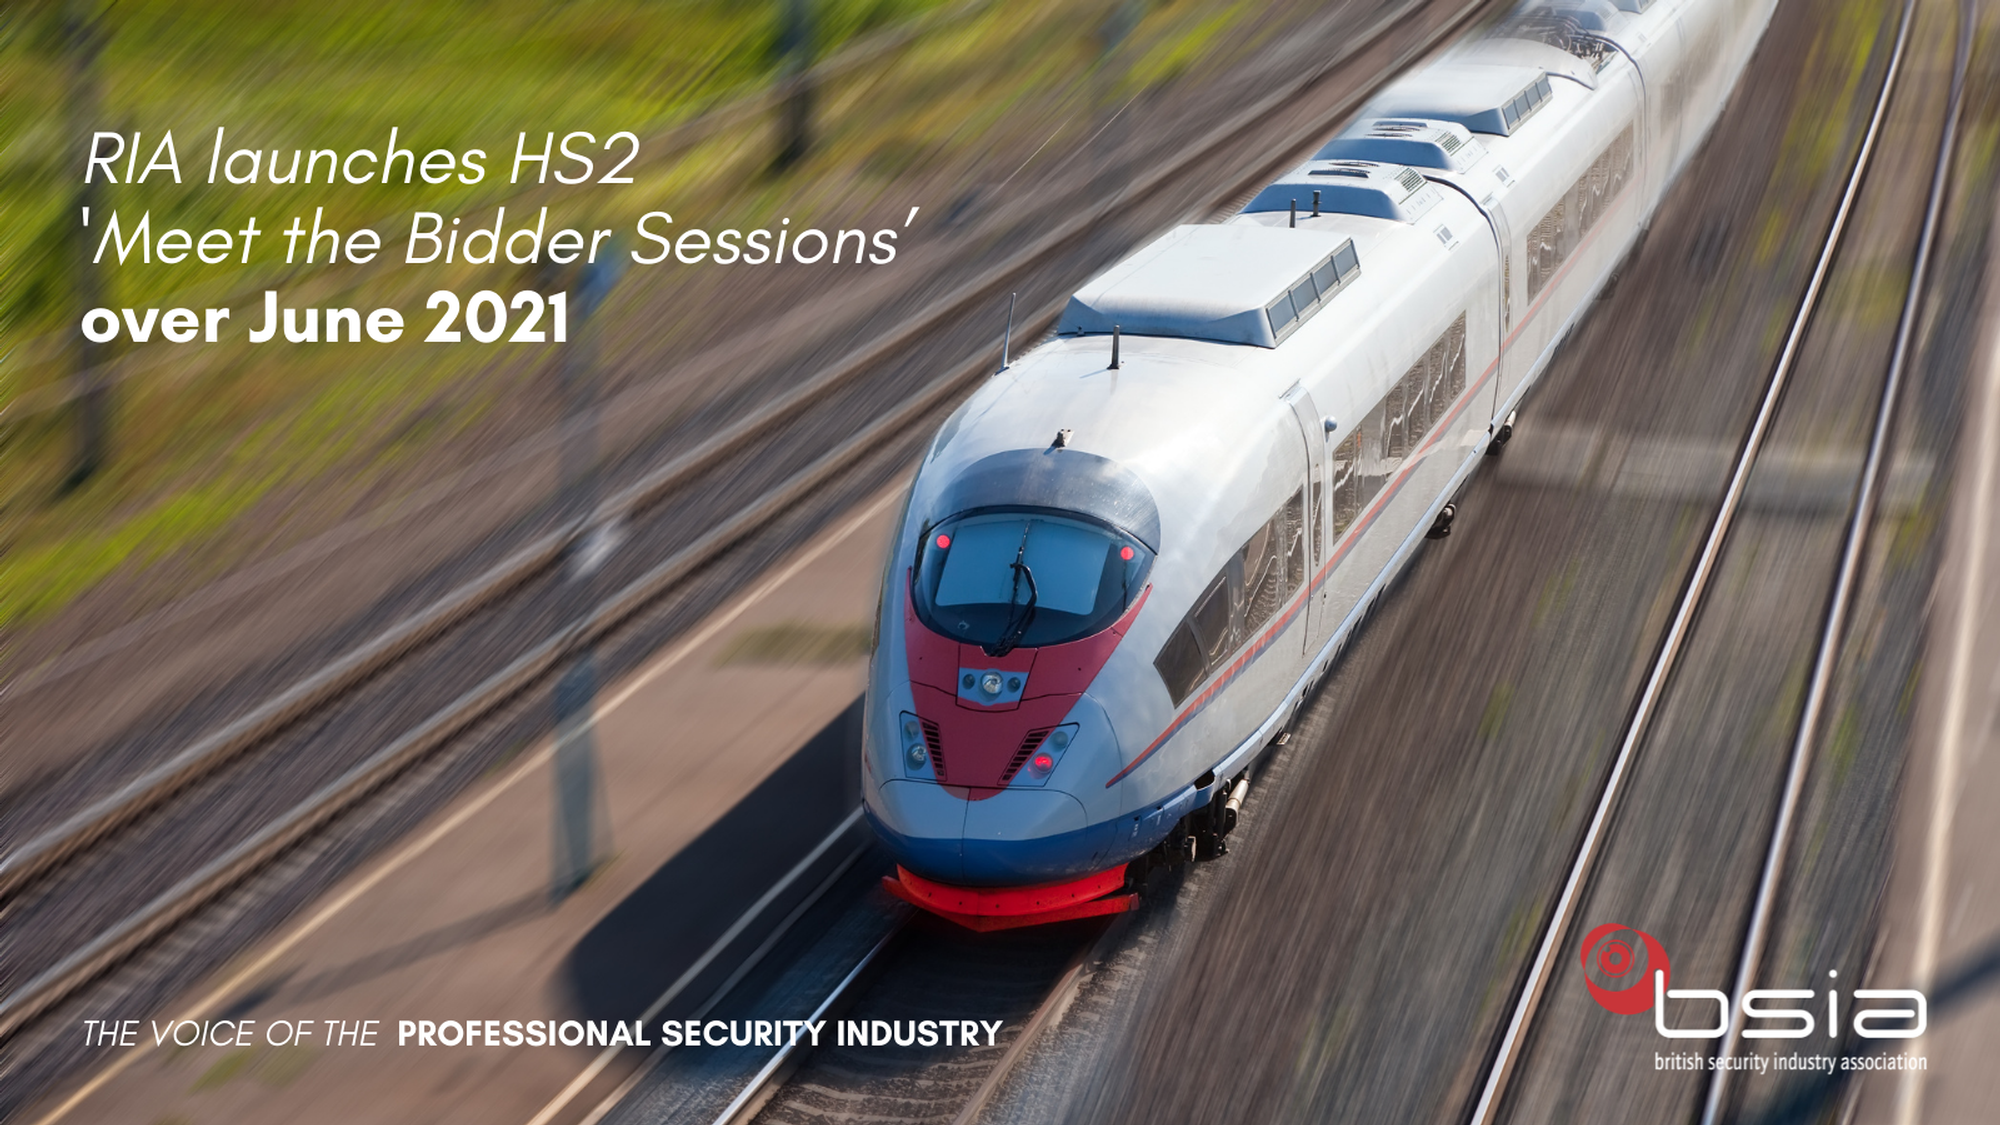 RIA launches HS2 ‘Meet the Bidder Sessions’ over June 2021